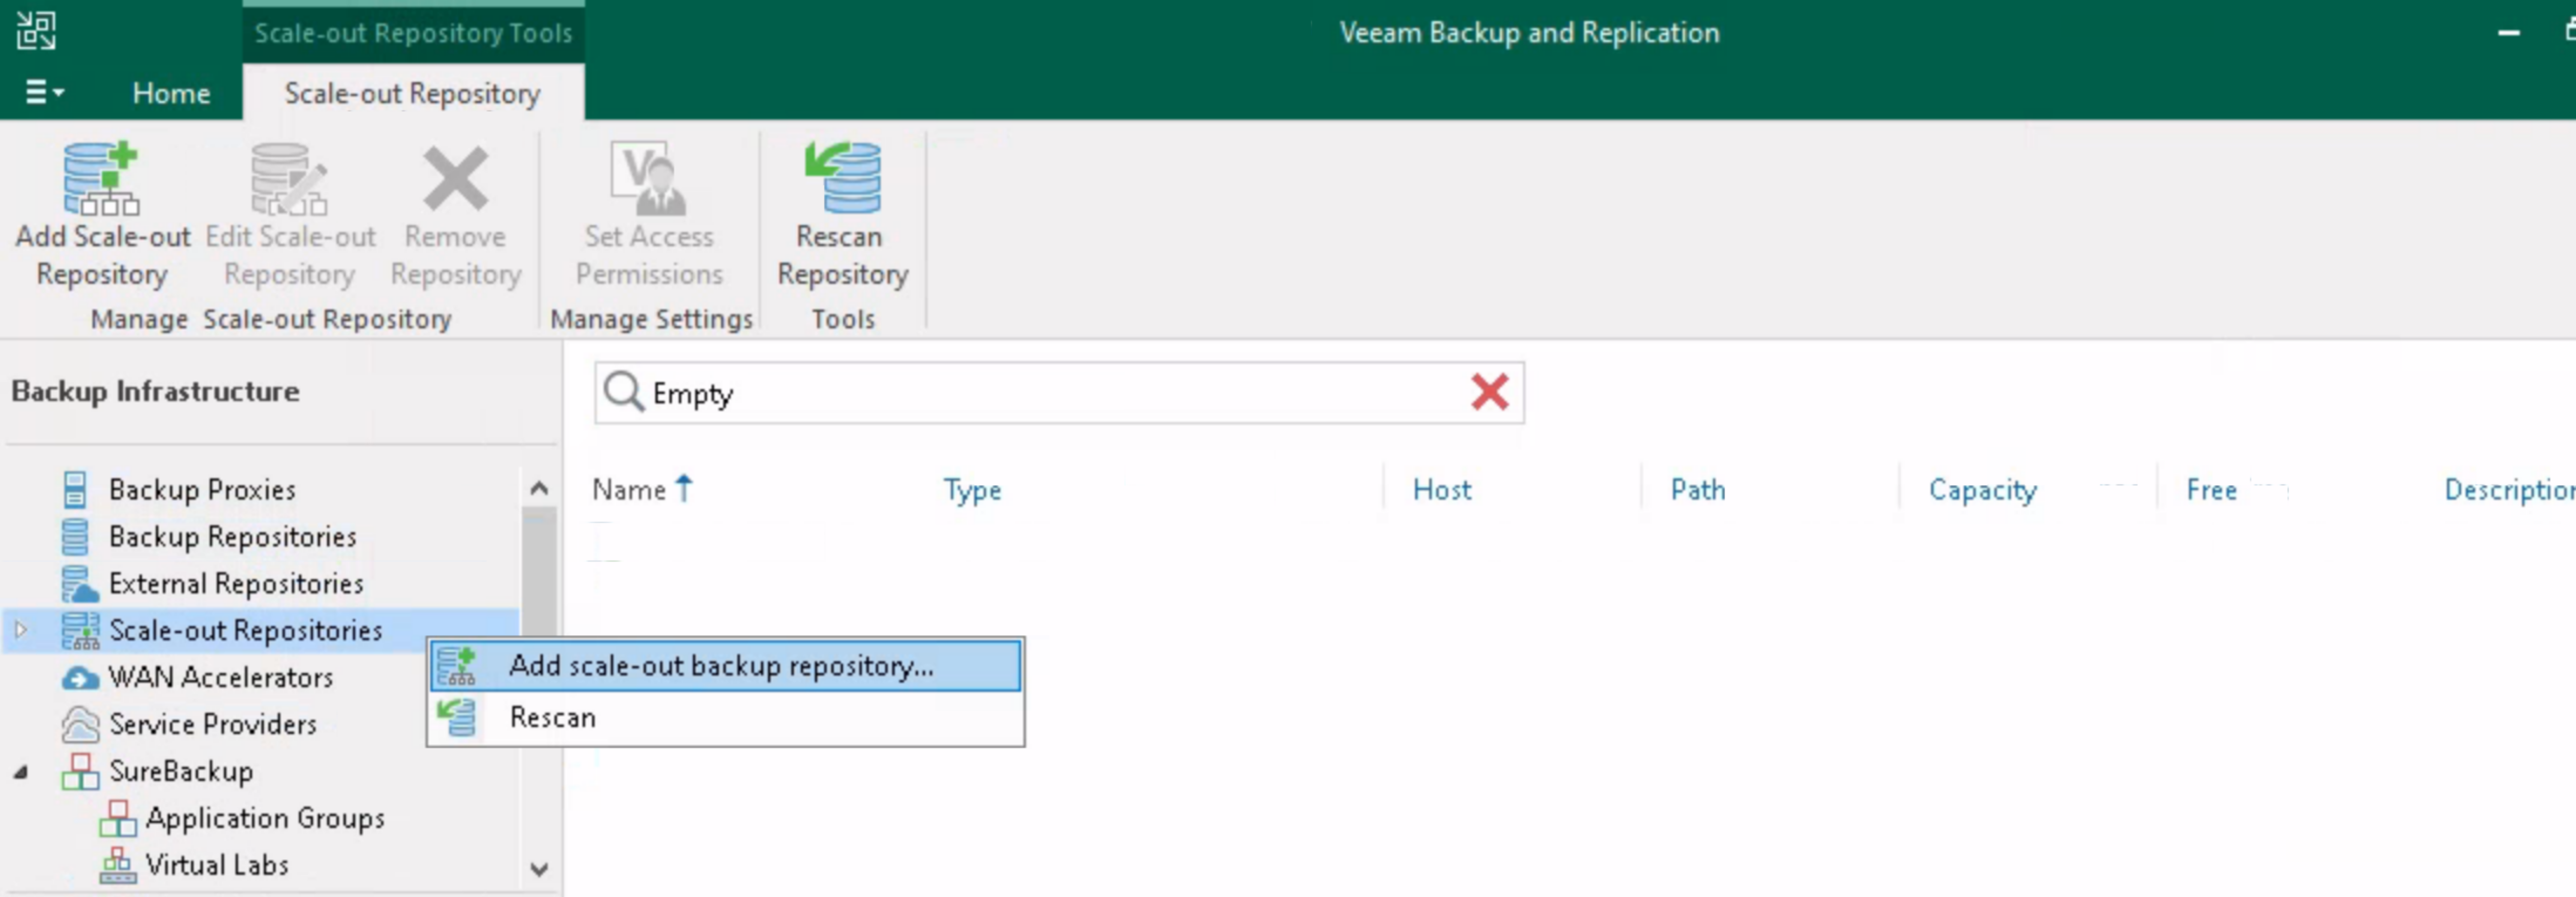 Veeam scale-out backup repository ekle